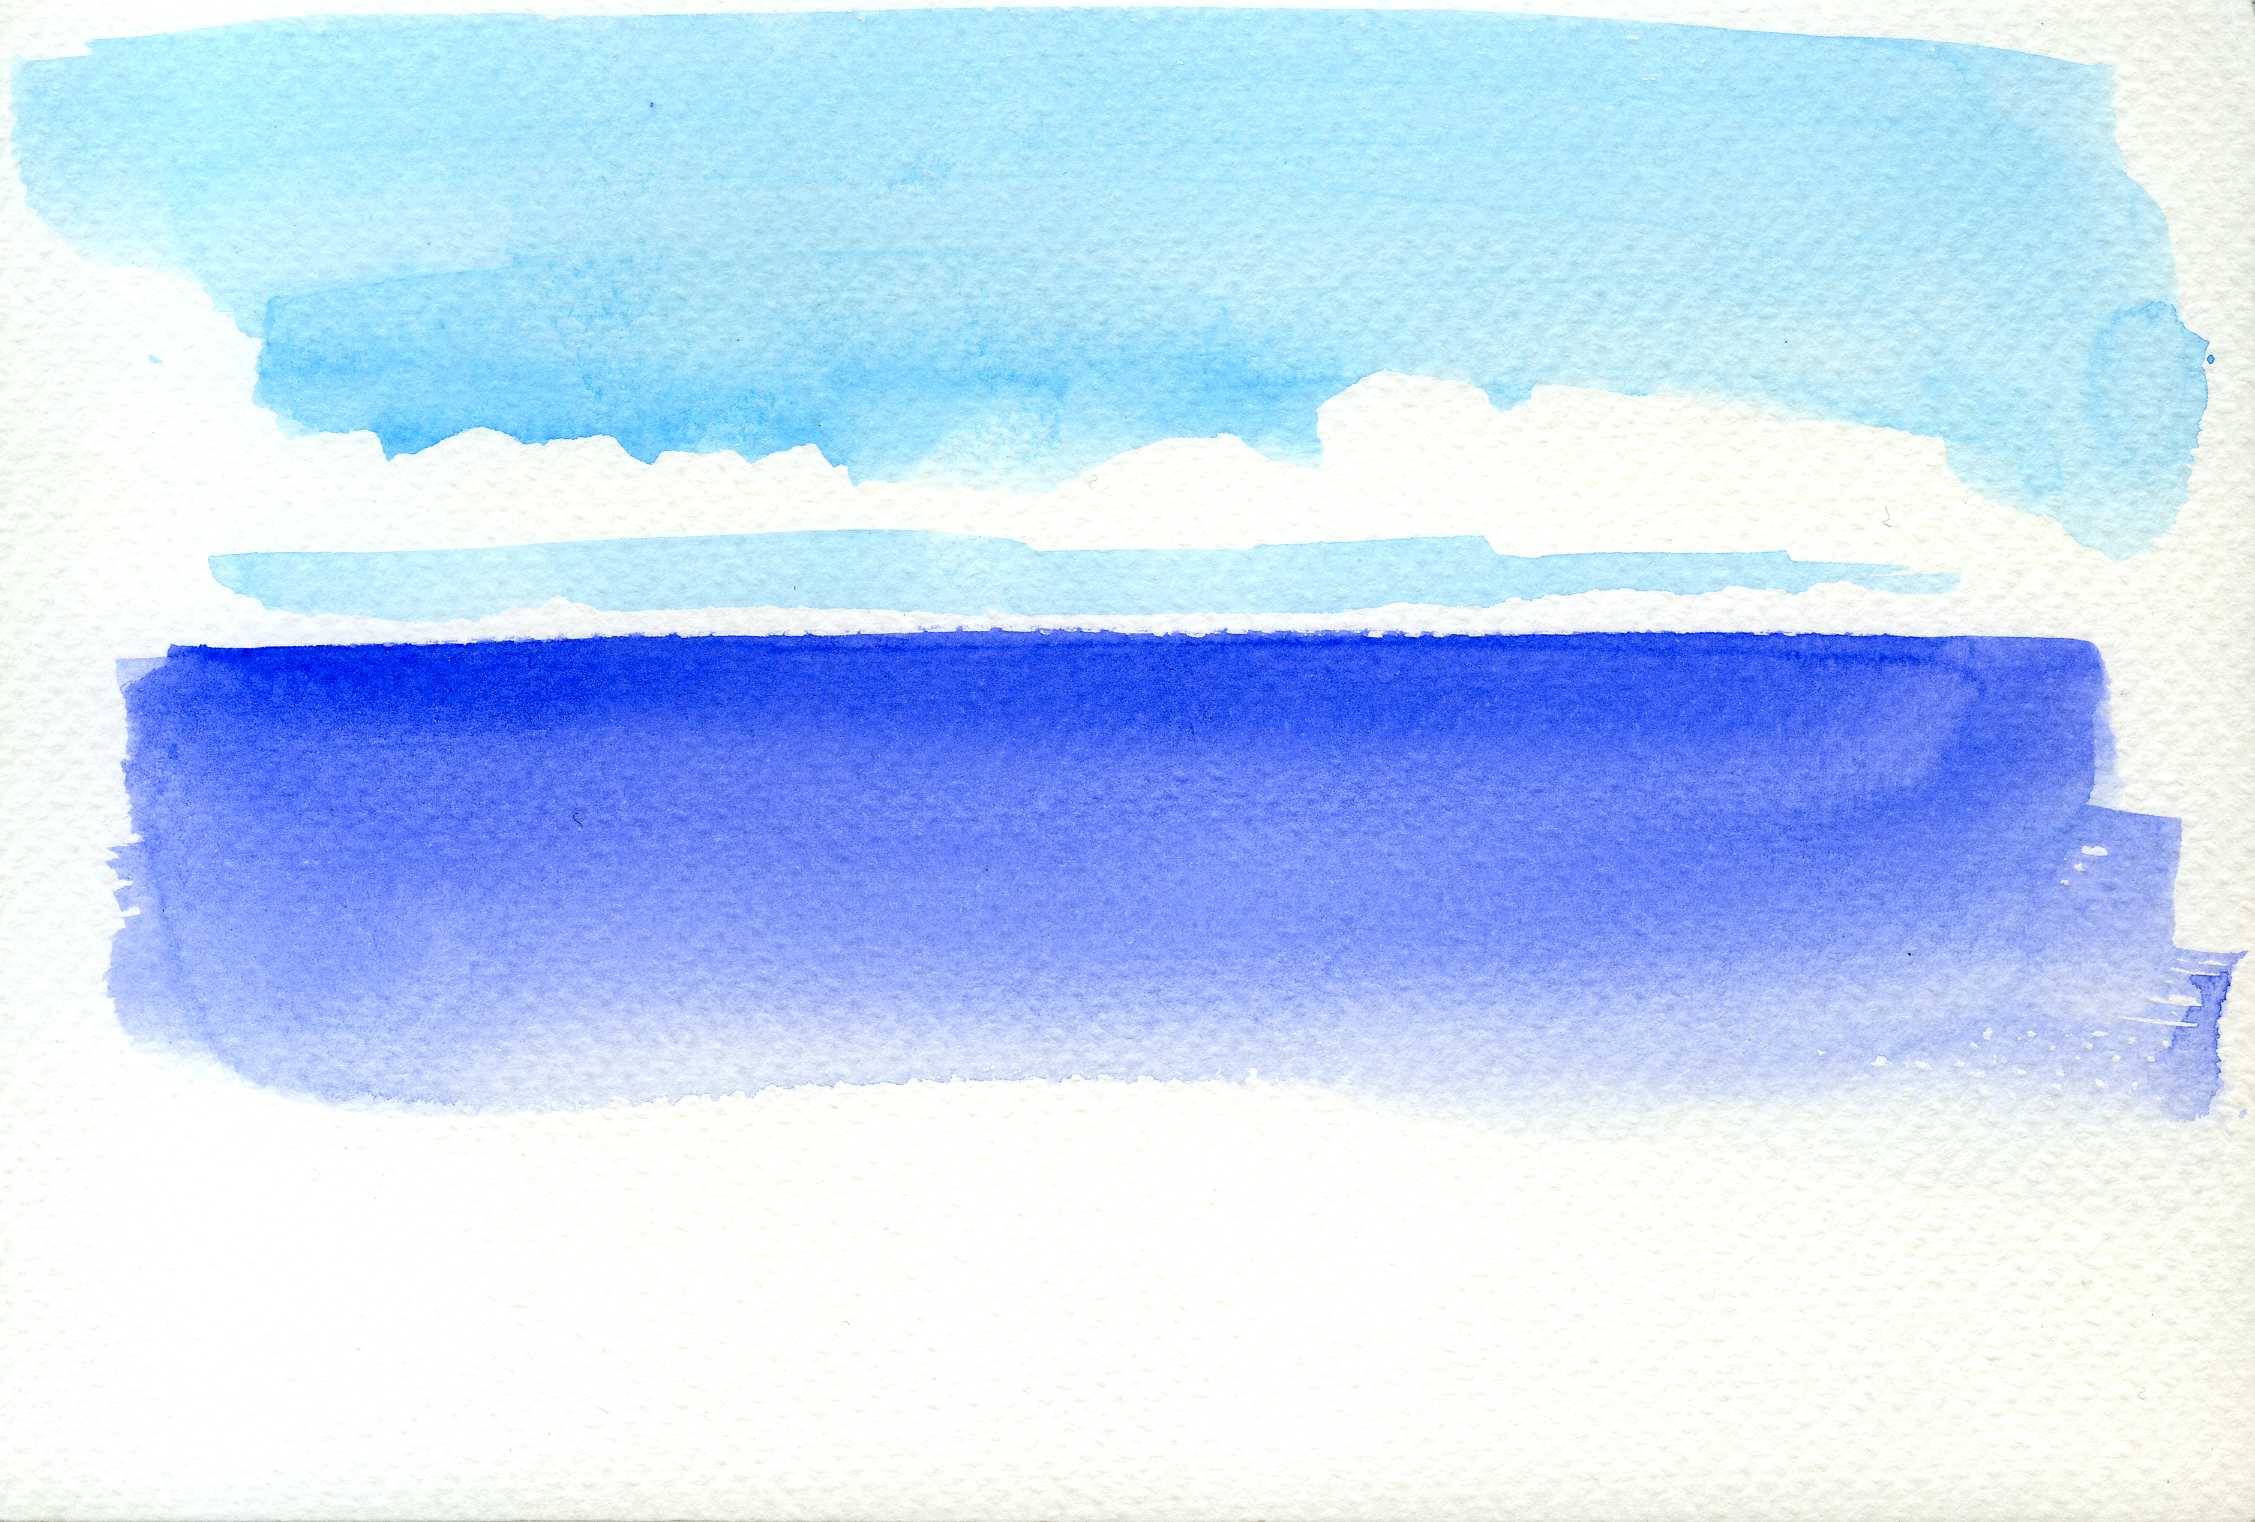 blue and white watercolor paints